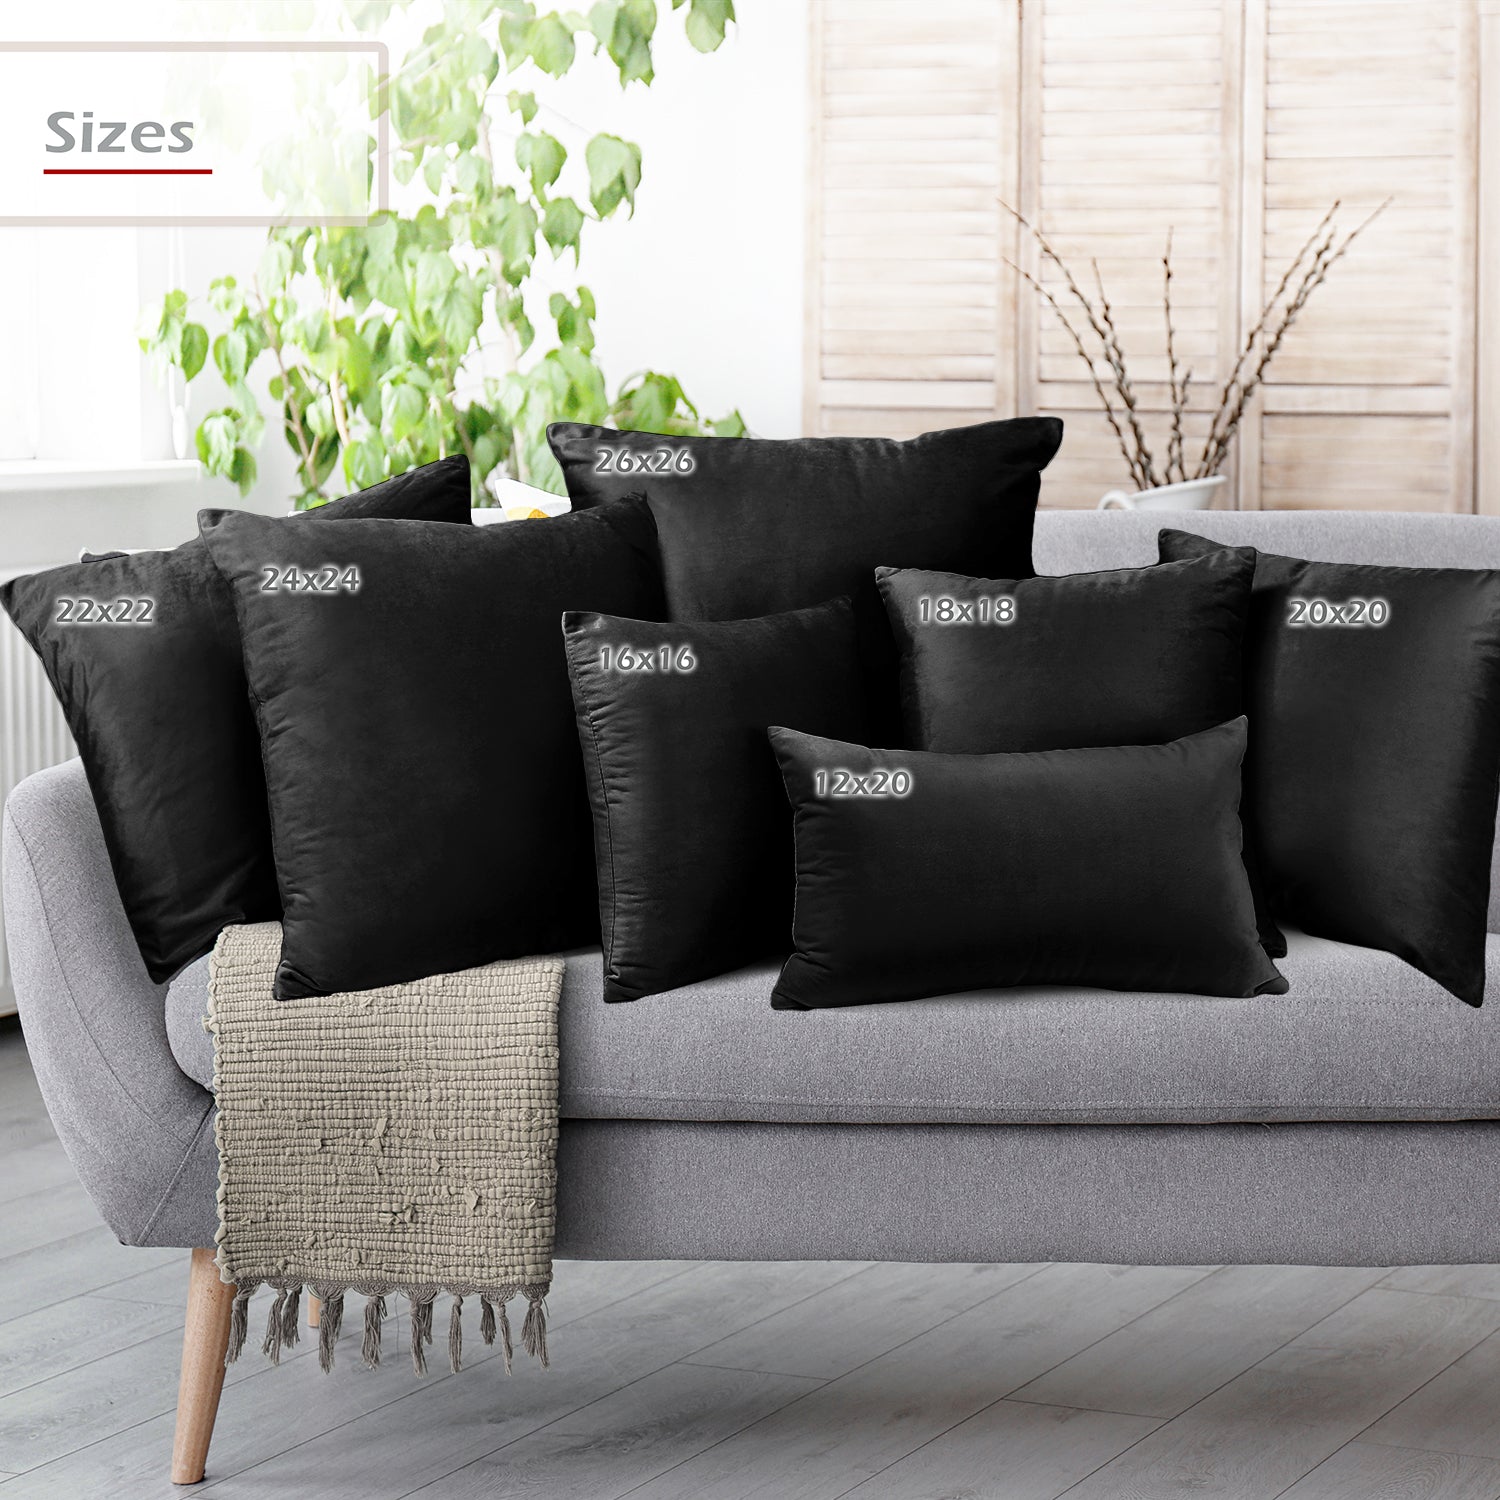 HWY 50 Black Decorative Throw Pillows Covers 20x20 Inch for Couch Sofa Bed  Living Room, Chenille Soft Comfy Solid Square Throw Pillows Cases Set